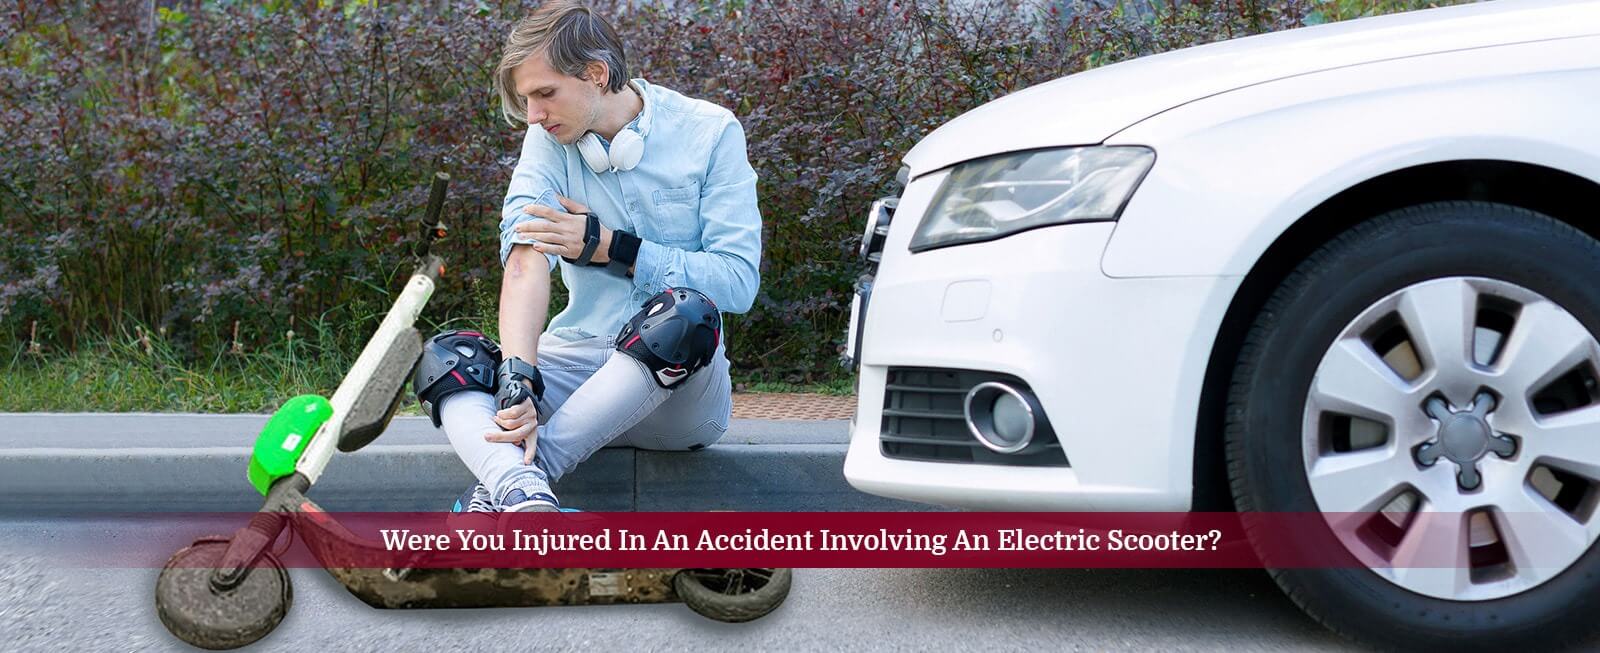 Were You Injured In An Accident Involving An Electric Scooter?